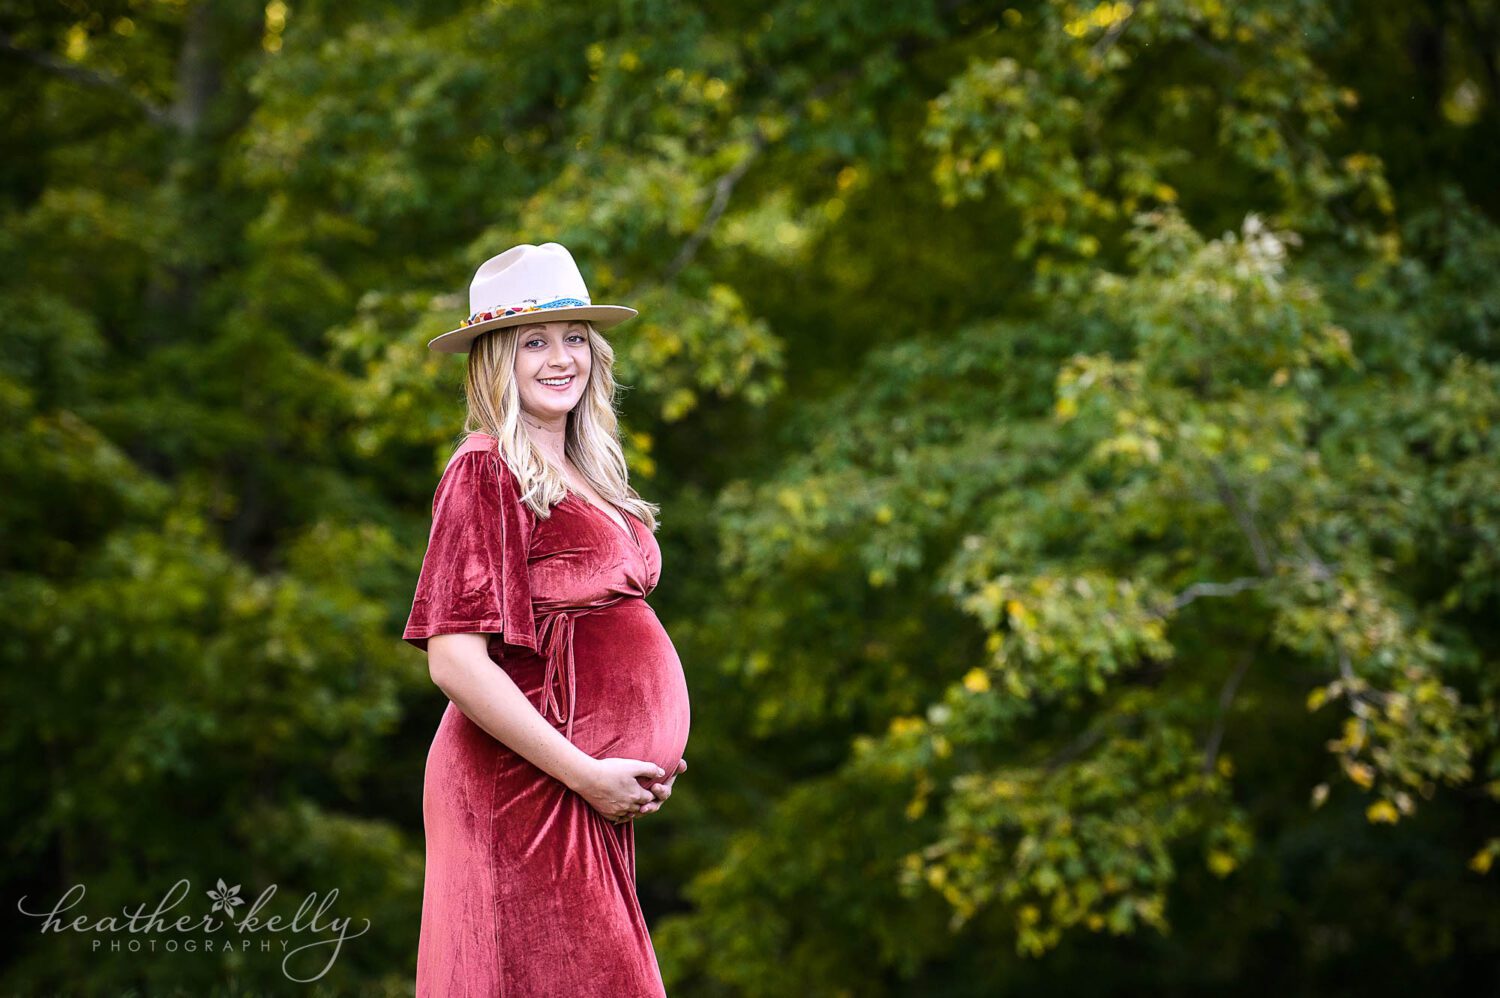 Bridgeport CT maternity photography. A maternity photography session with mom in a dress wearing a hat. She is smiling at the camera and her hands are under her belly. 